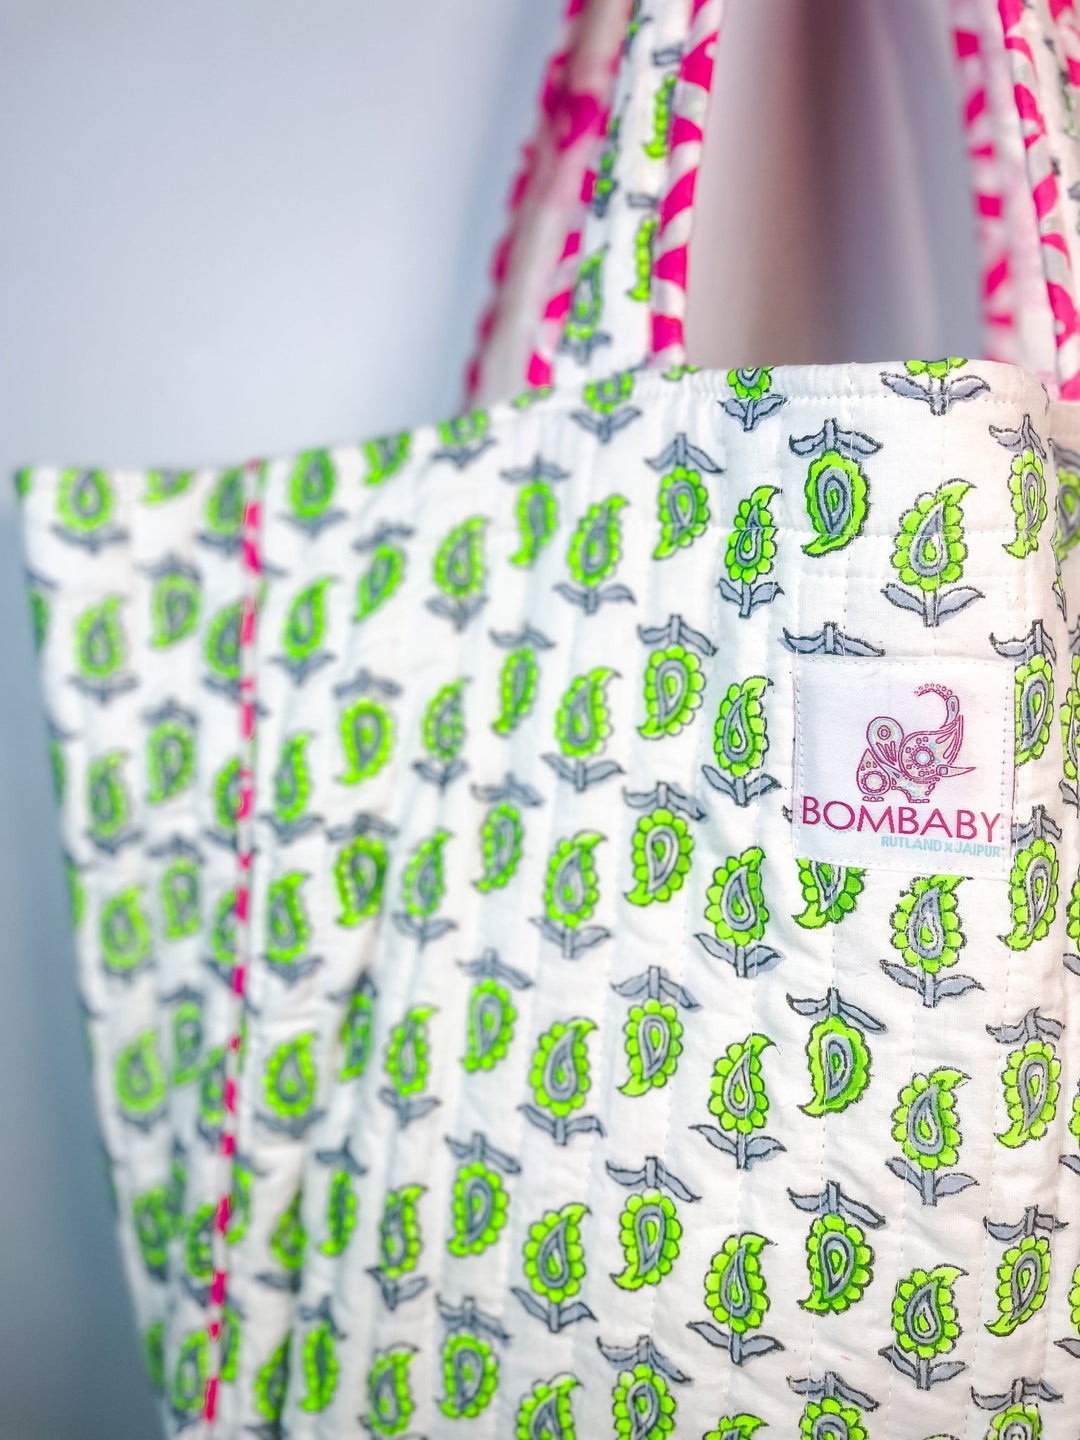 Neon Paisley | Handmade Quilted Tote Bag - Bombaby